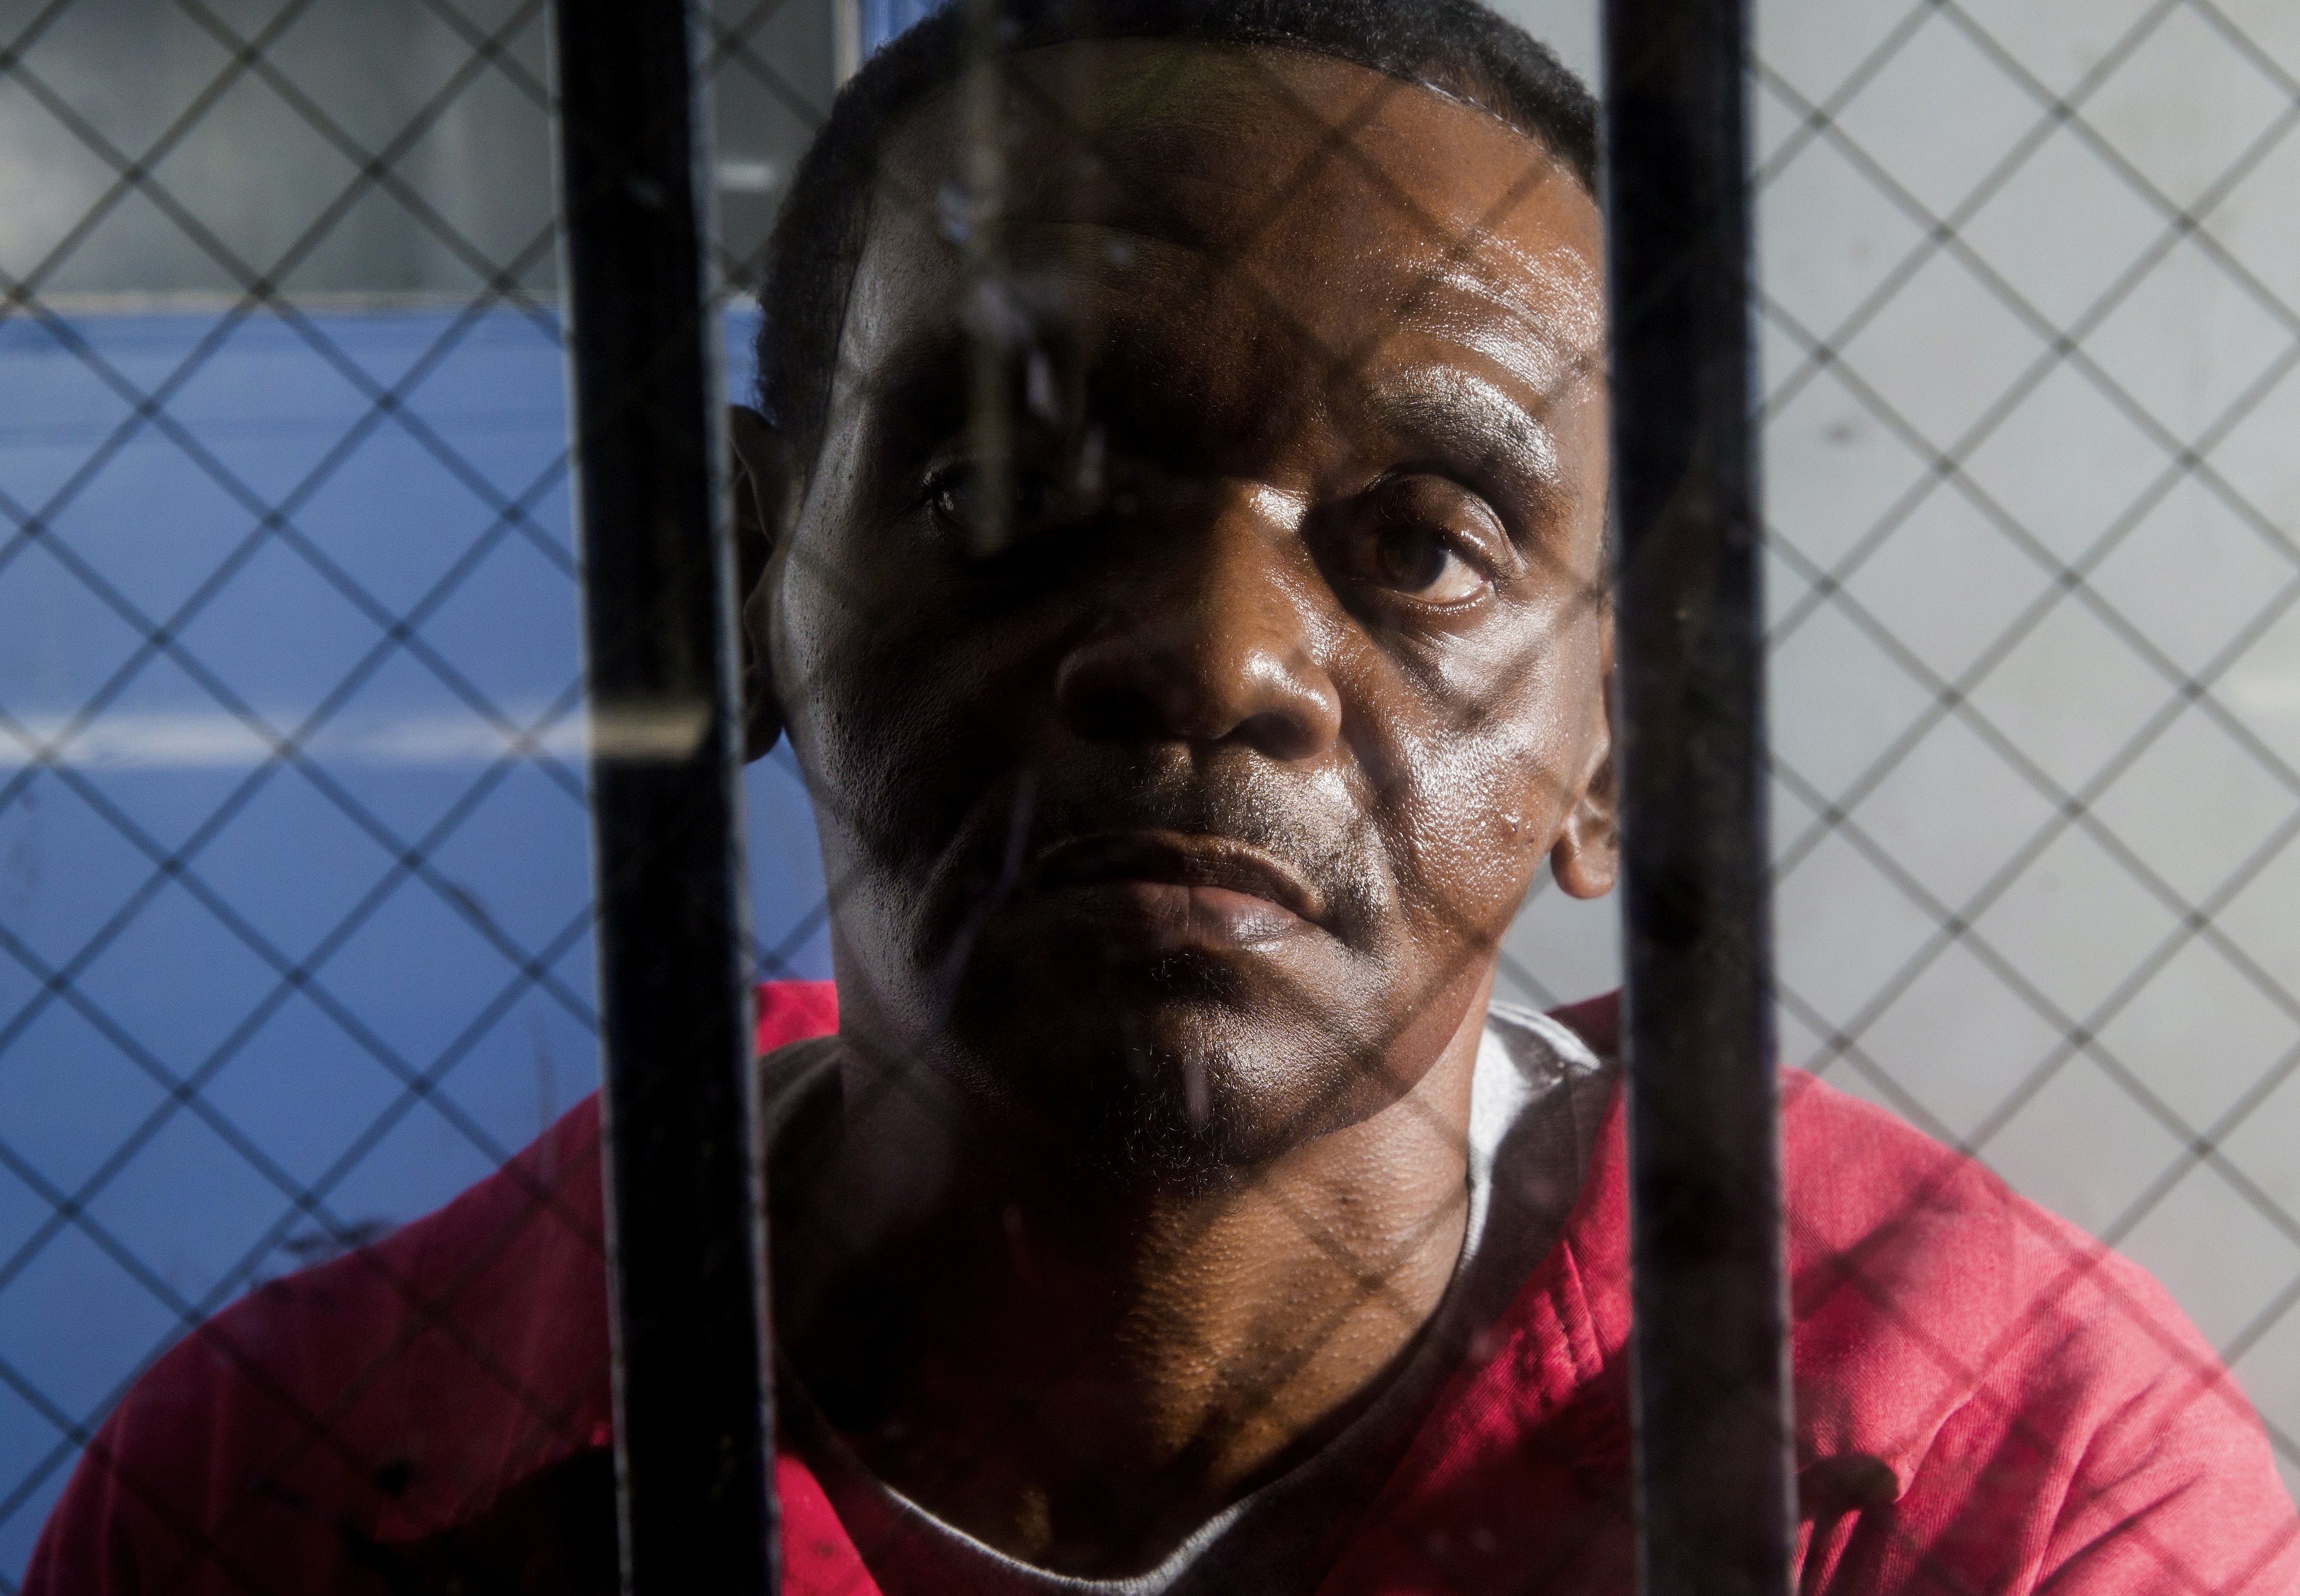 Henry McCollum sits on death row at Central Prison in Raleigh, N.C., on Aug. 12, 2014. He and his half-brother Leon Brown have spent more than three decades in prison for the alleged rape and murder of 11-year-old Sabrina Buie in 1983 (Travis Long—AP)